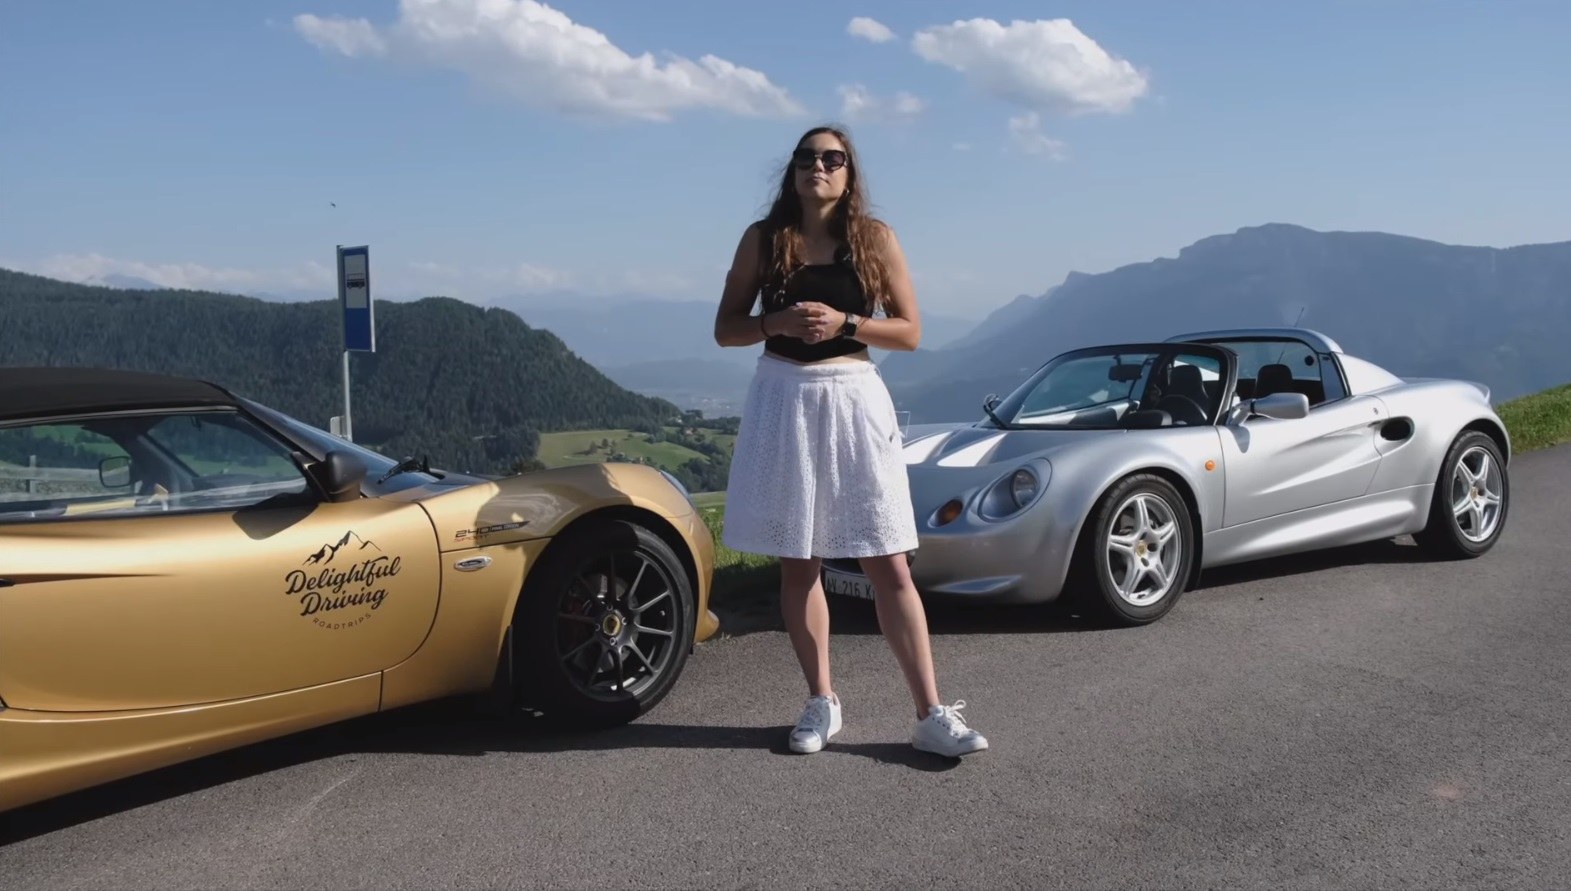 The Lotus Elise Was Named For Her. Now She Owns the Last One Made